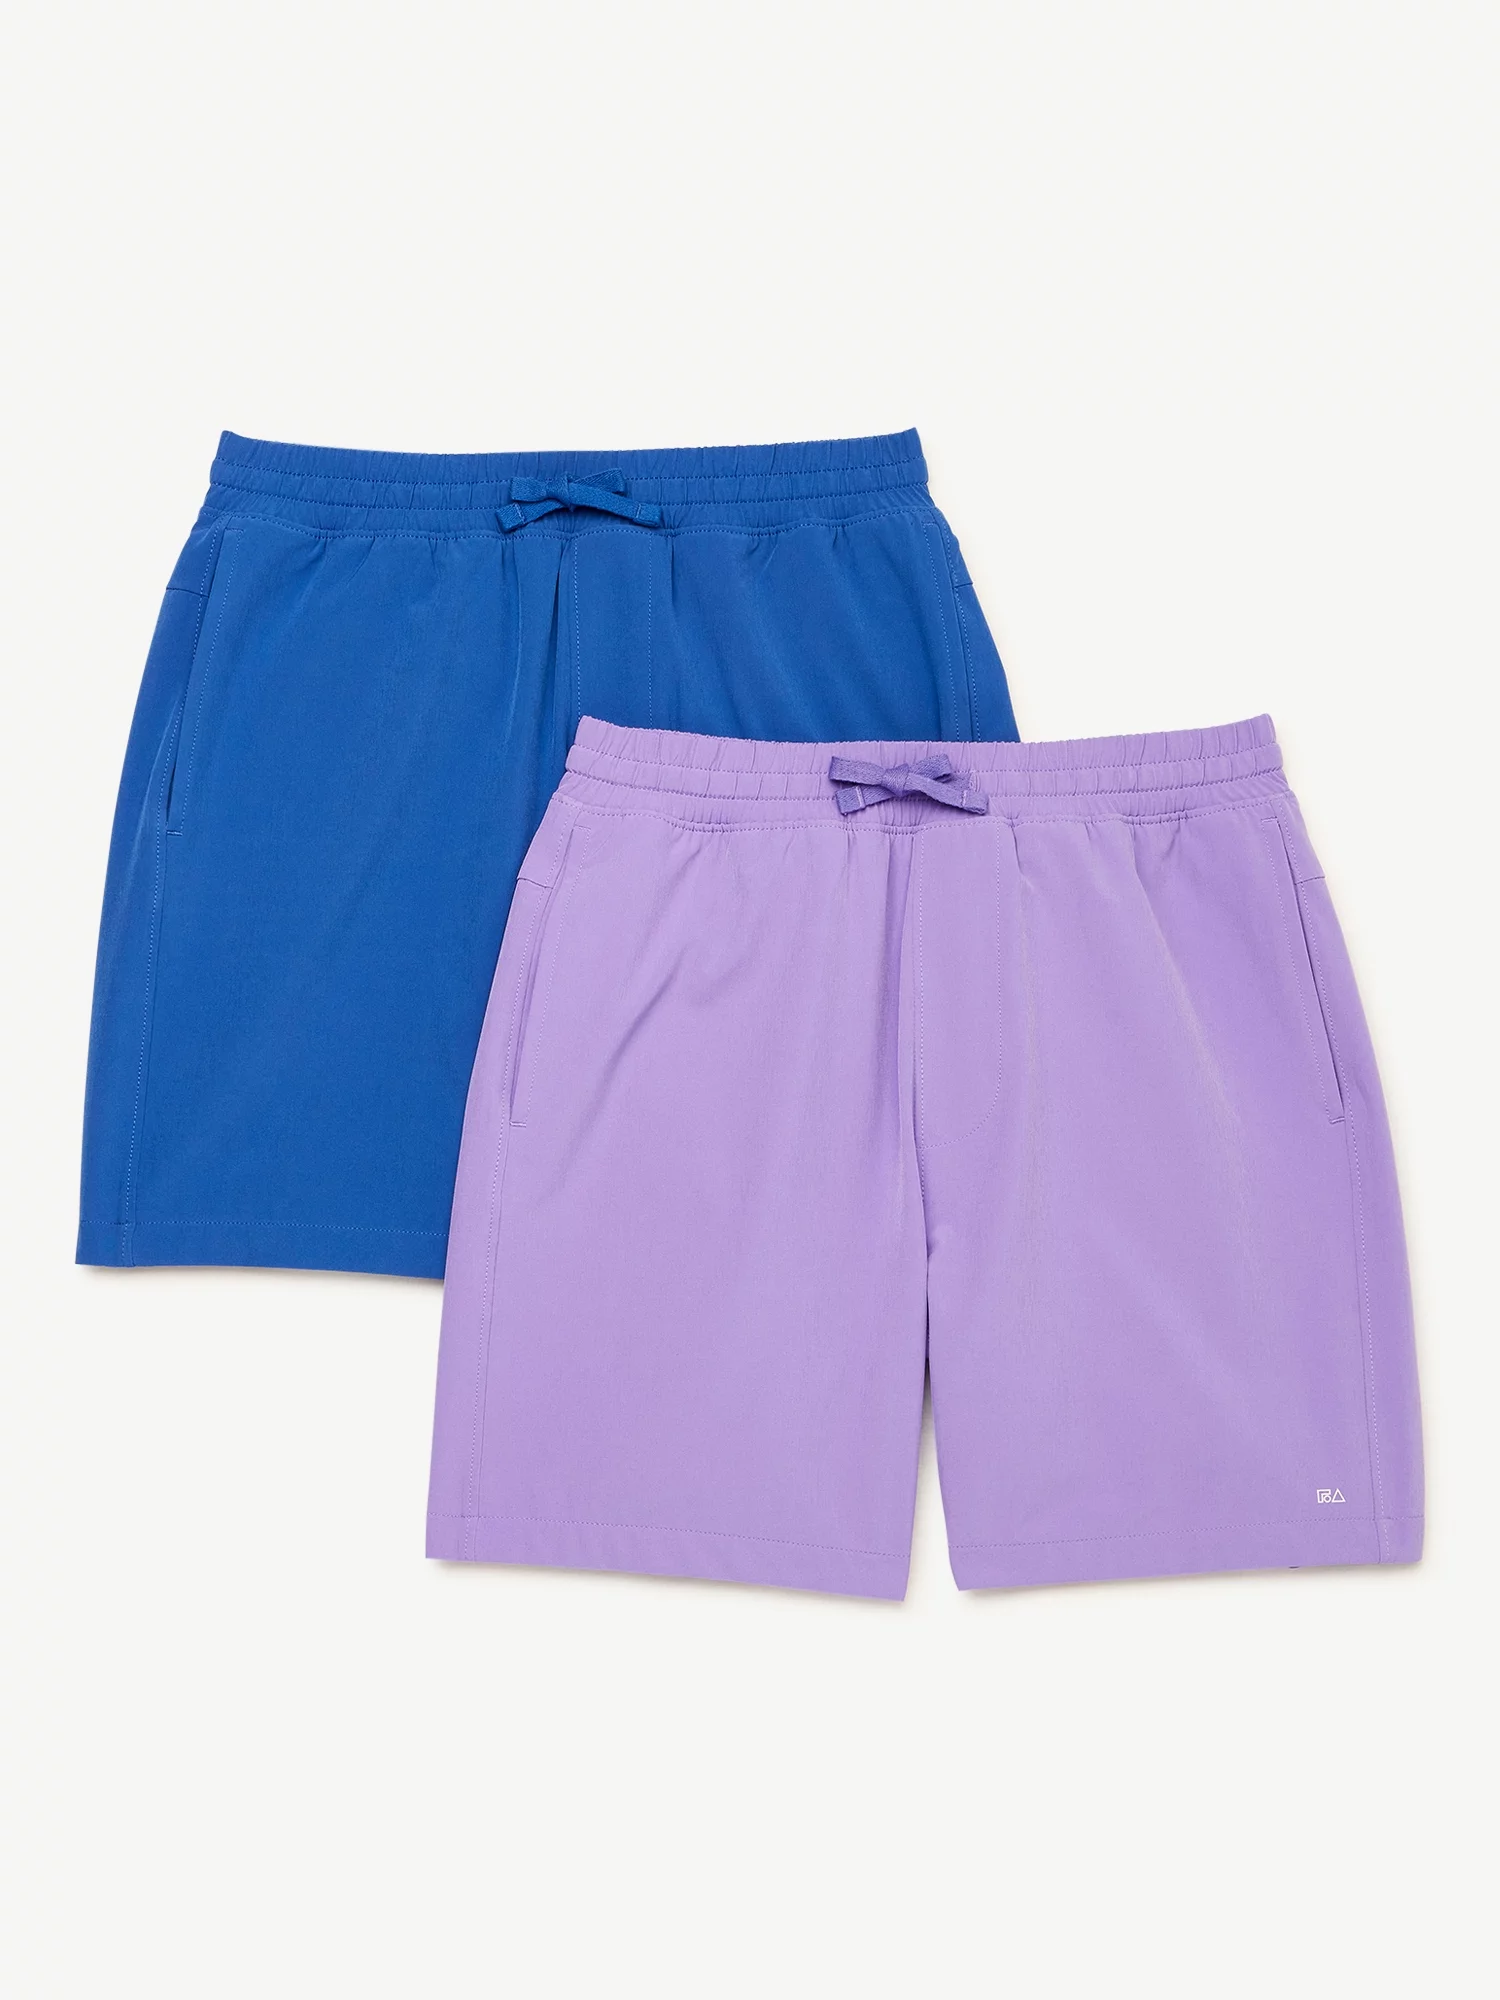 Free Assembly Boys 4-Way Stretch Shorts, 2-Pack, Sizes 4-18